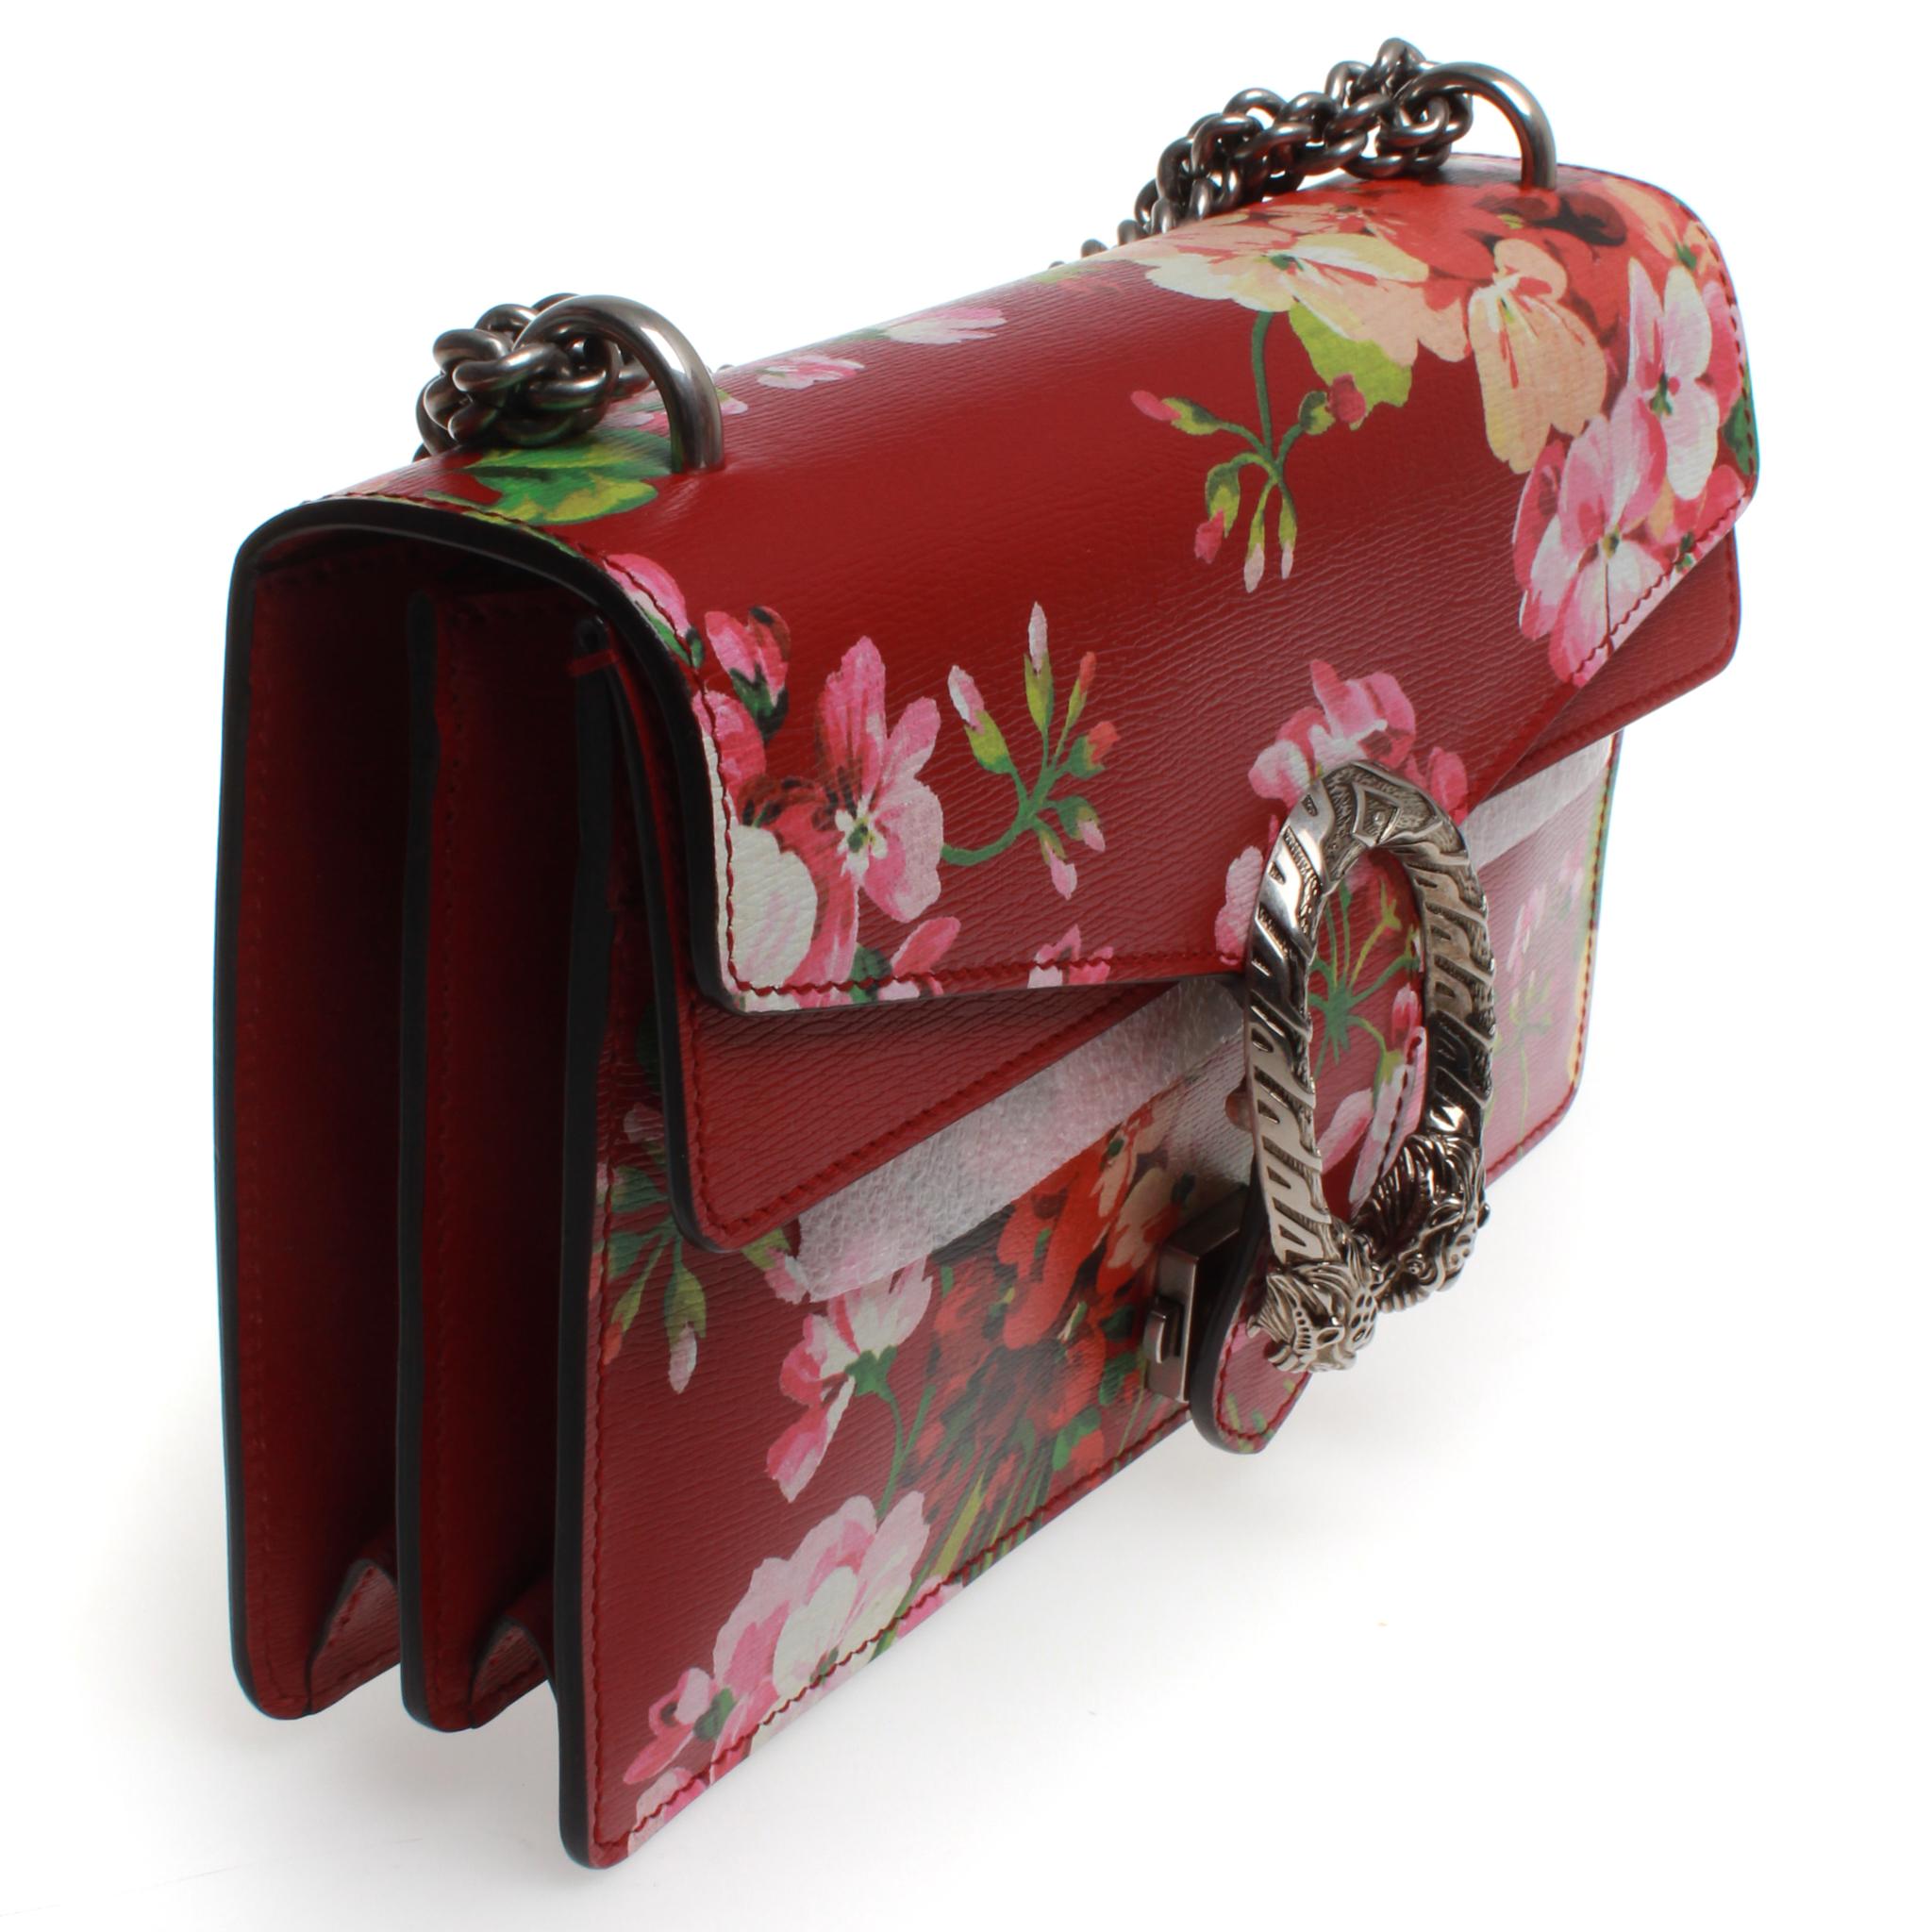 Gucci Dionysus cerise blooms shoulder bag with printed floral detailing, hand painted edges, antique silver toned hardware and lined with cotton.